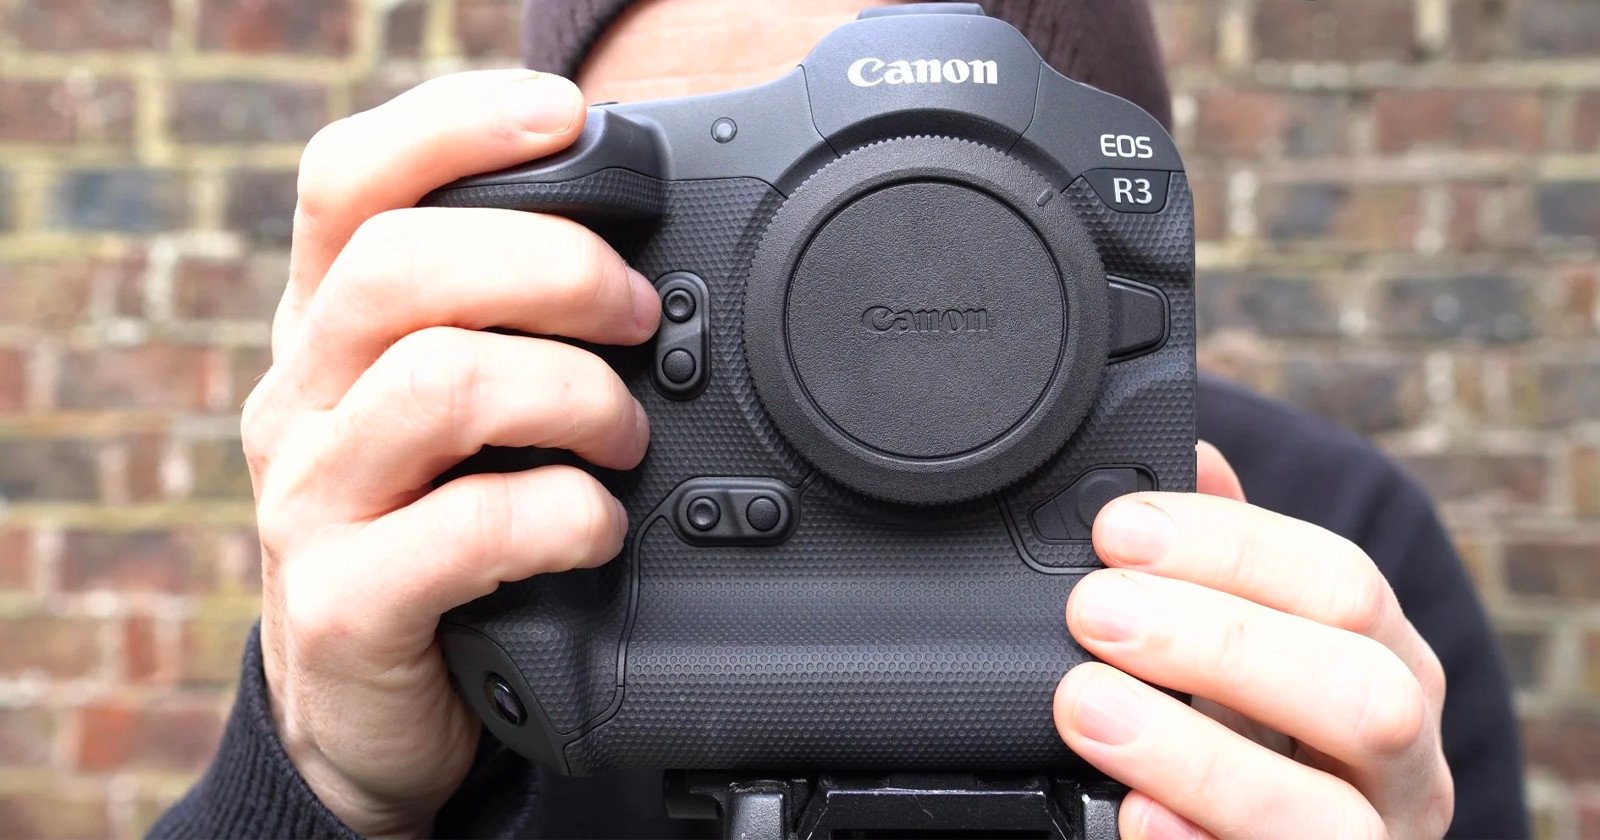 Canon EOS R3 Hands-On: 10 Things You Need to Know